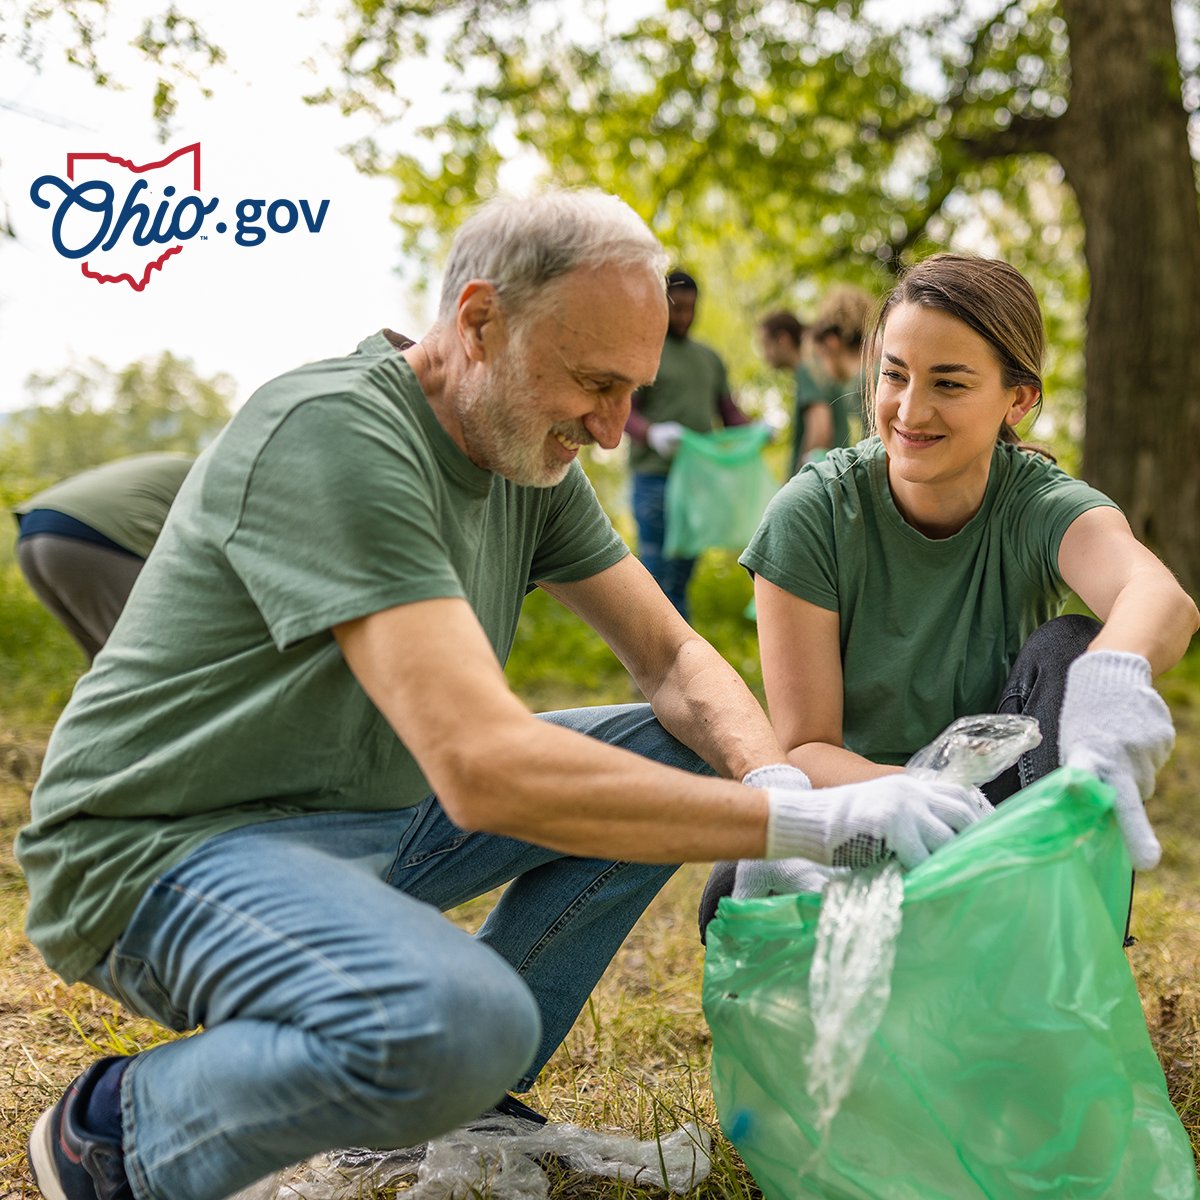 It's National Volunteer Week! Ohio is the heart of giving. Our state agencies provide many diverse opportunities to use your time and talents to help others and your community. ohio.gov/volunteer